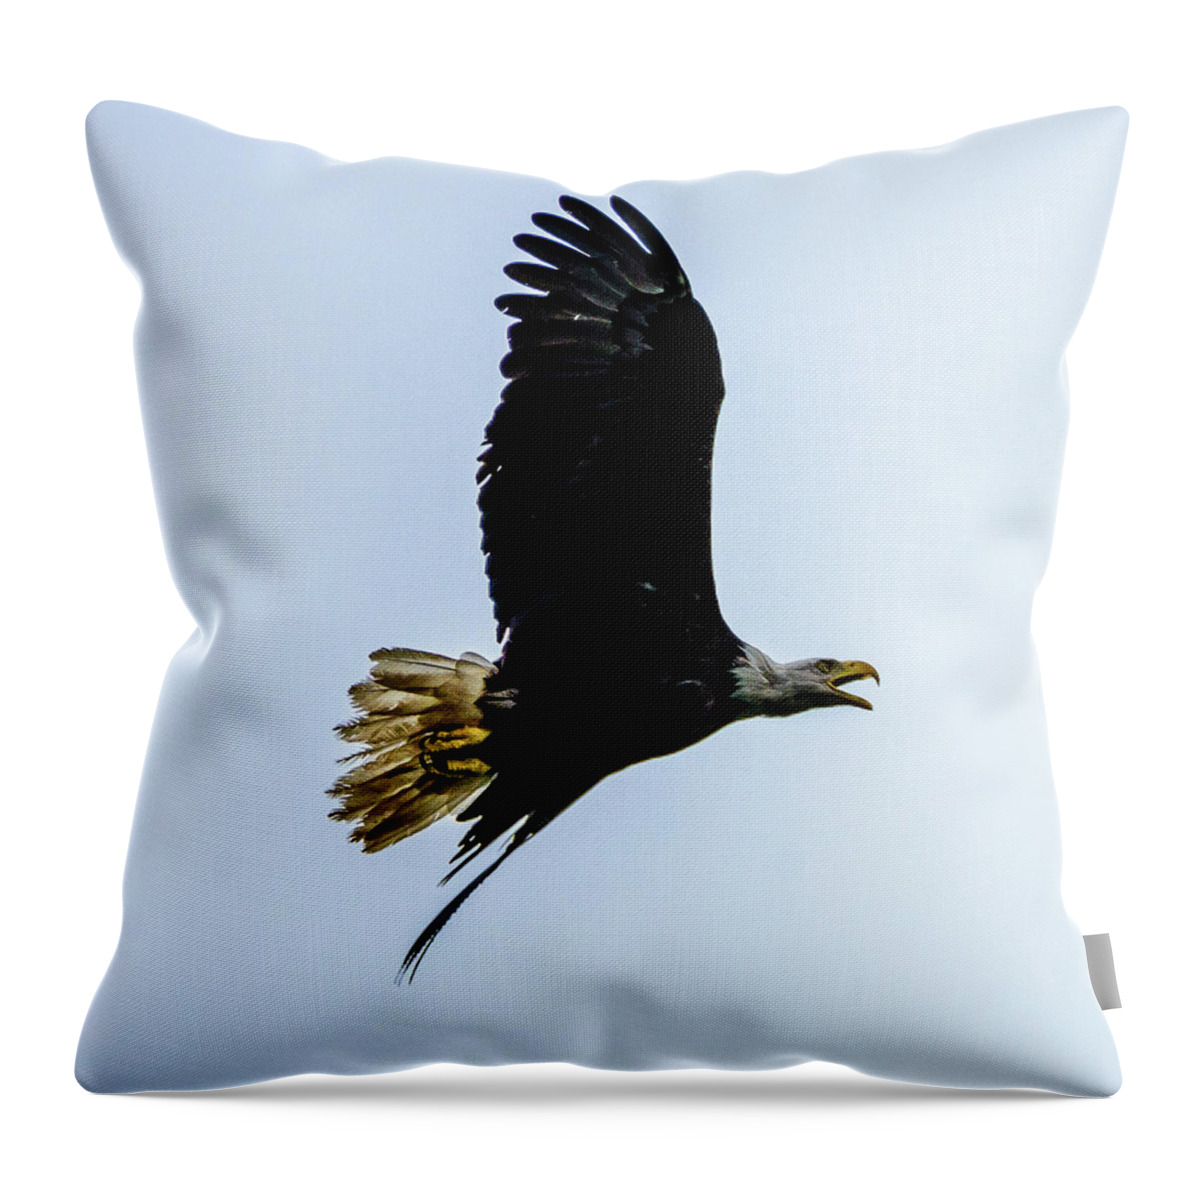 Eagle Throw Pillow featuring the photograph Eagle by Jerry Cahill